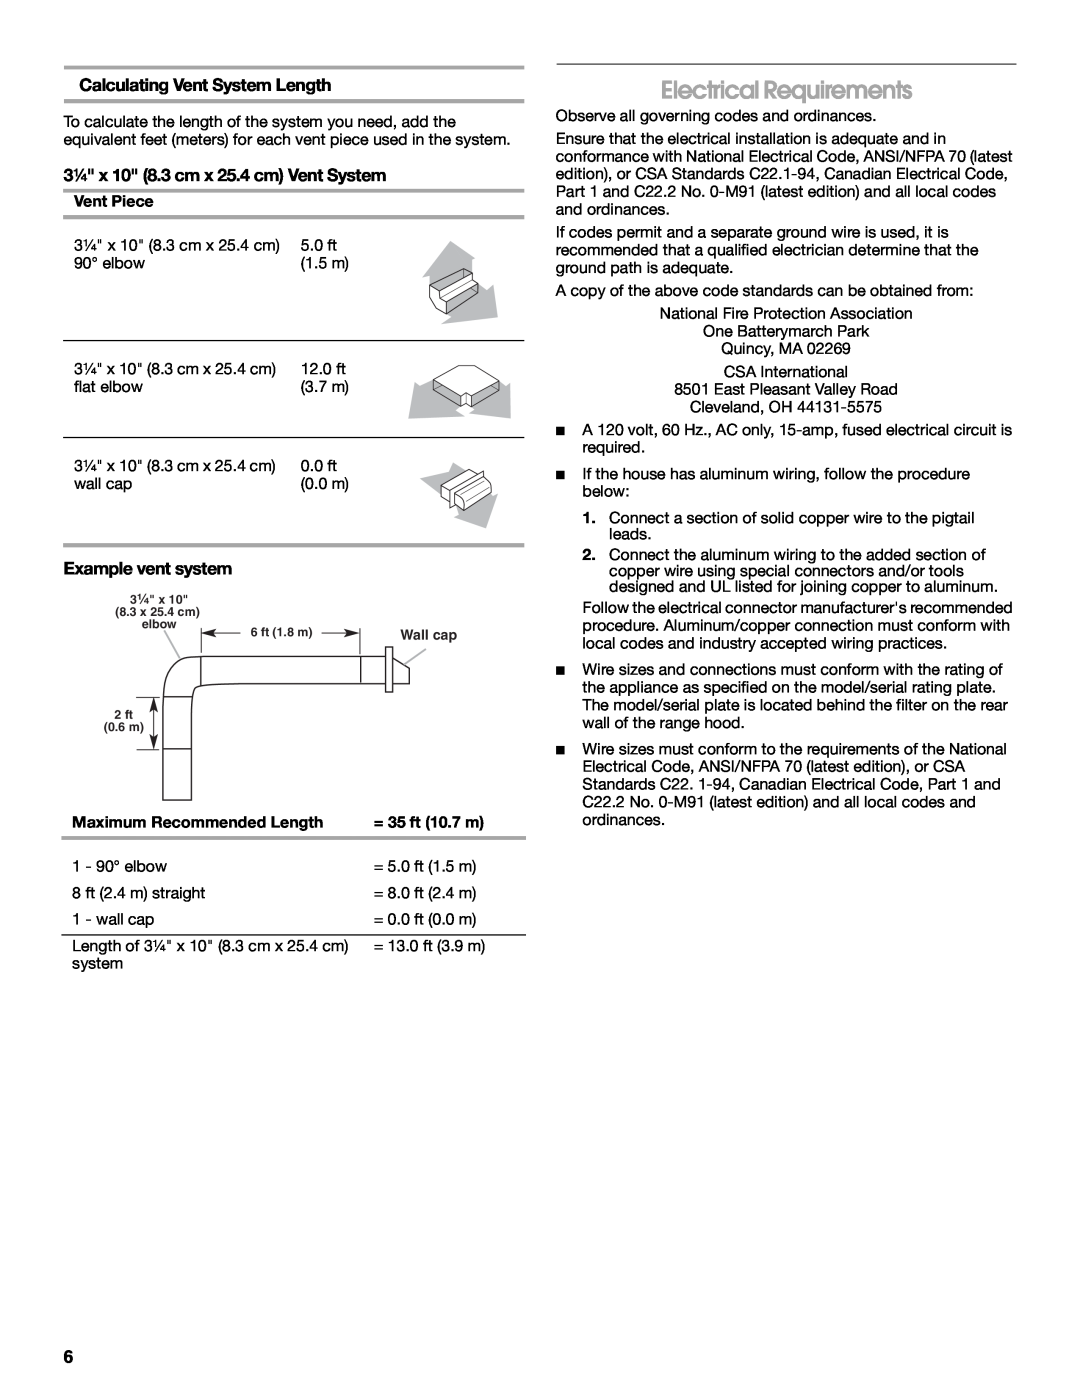 Whirlpool LI3Z3A Electrical Requirements, Calculating Vent System Length, 3¹⁄₄ x 10 8.3 cm x 25.4 cm Vent System 